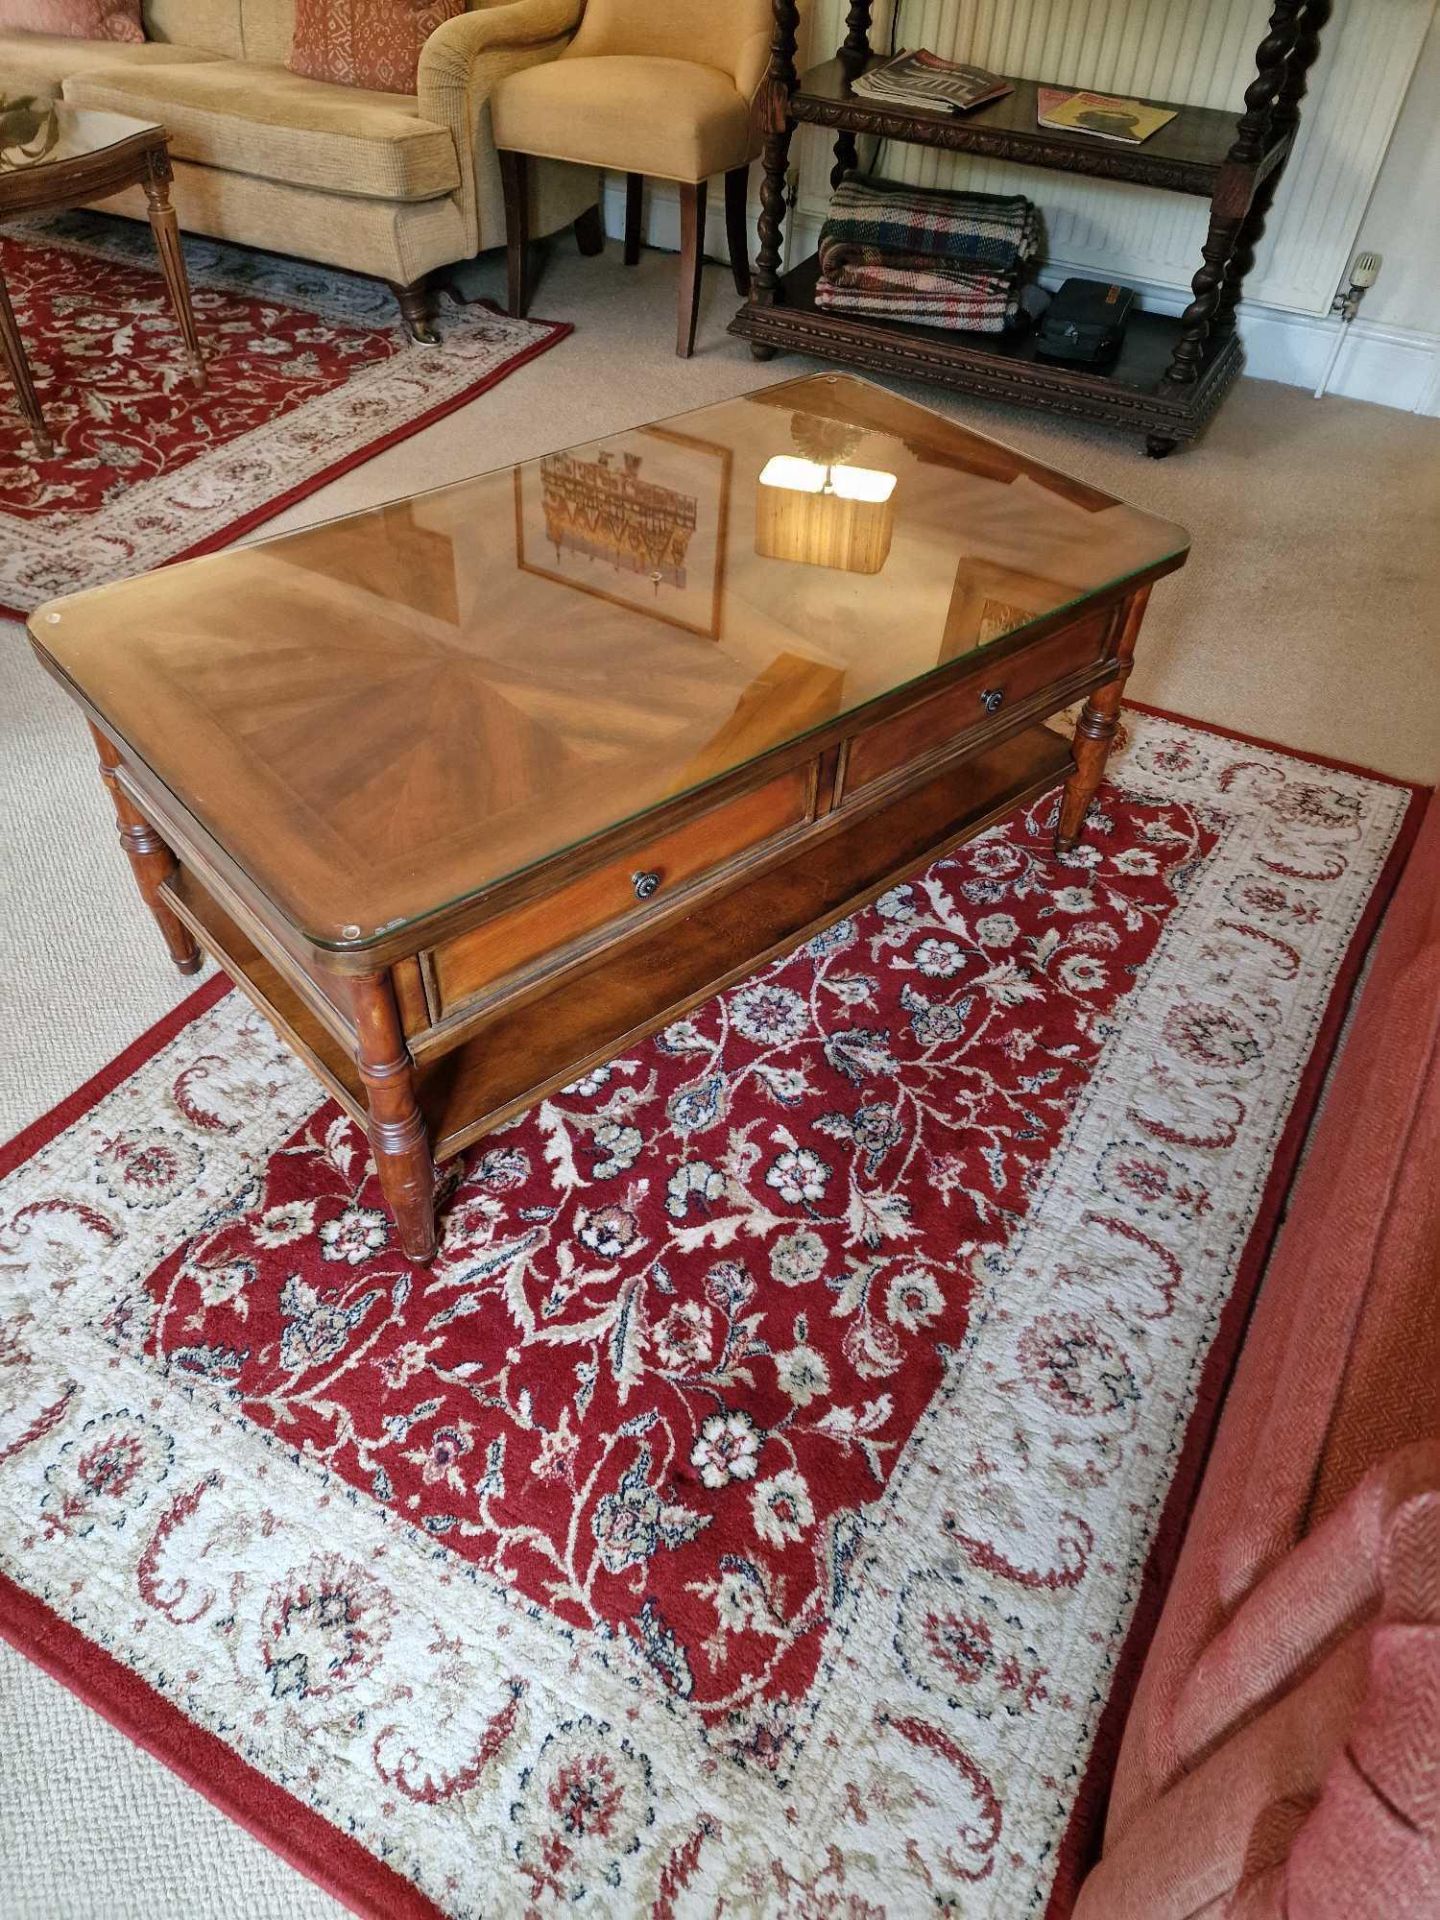 A Regency Style Cherry Wood Two Drawer Coffee Table With Undershelf 110 x 60 x 46cm